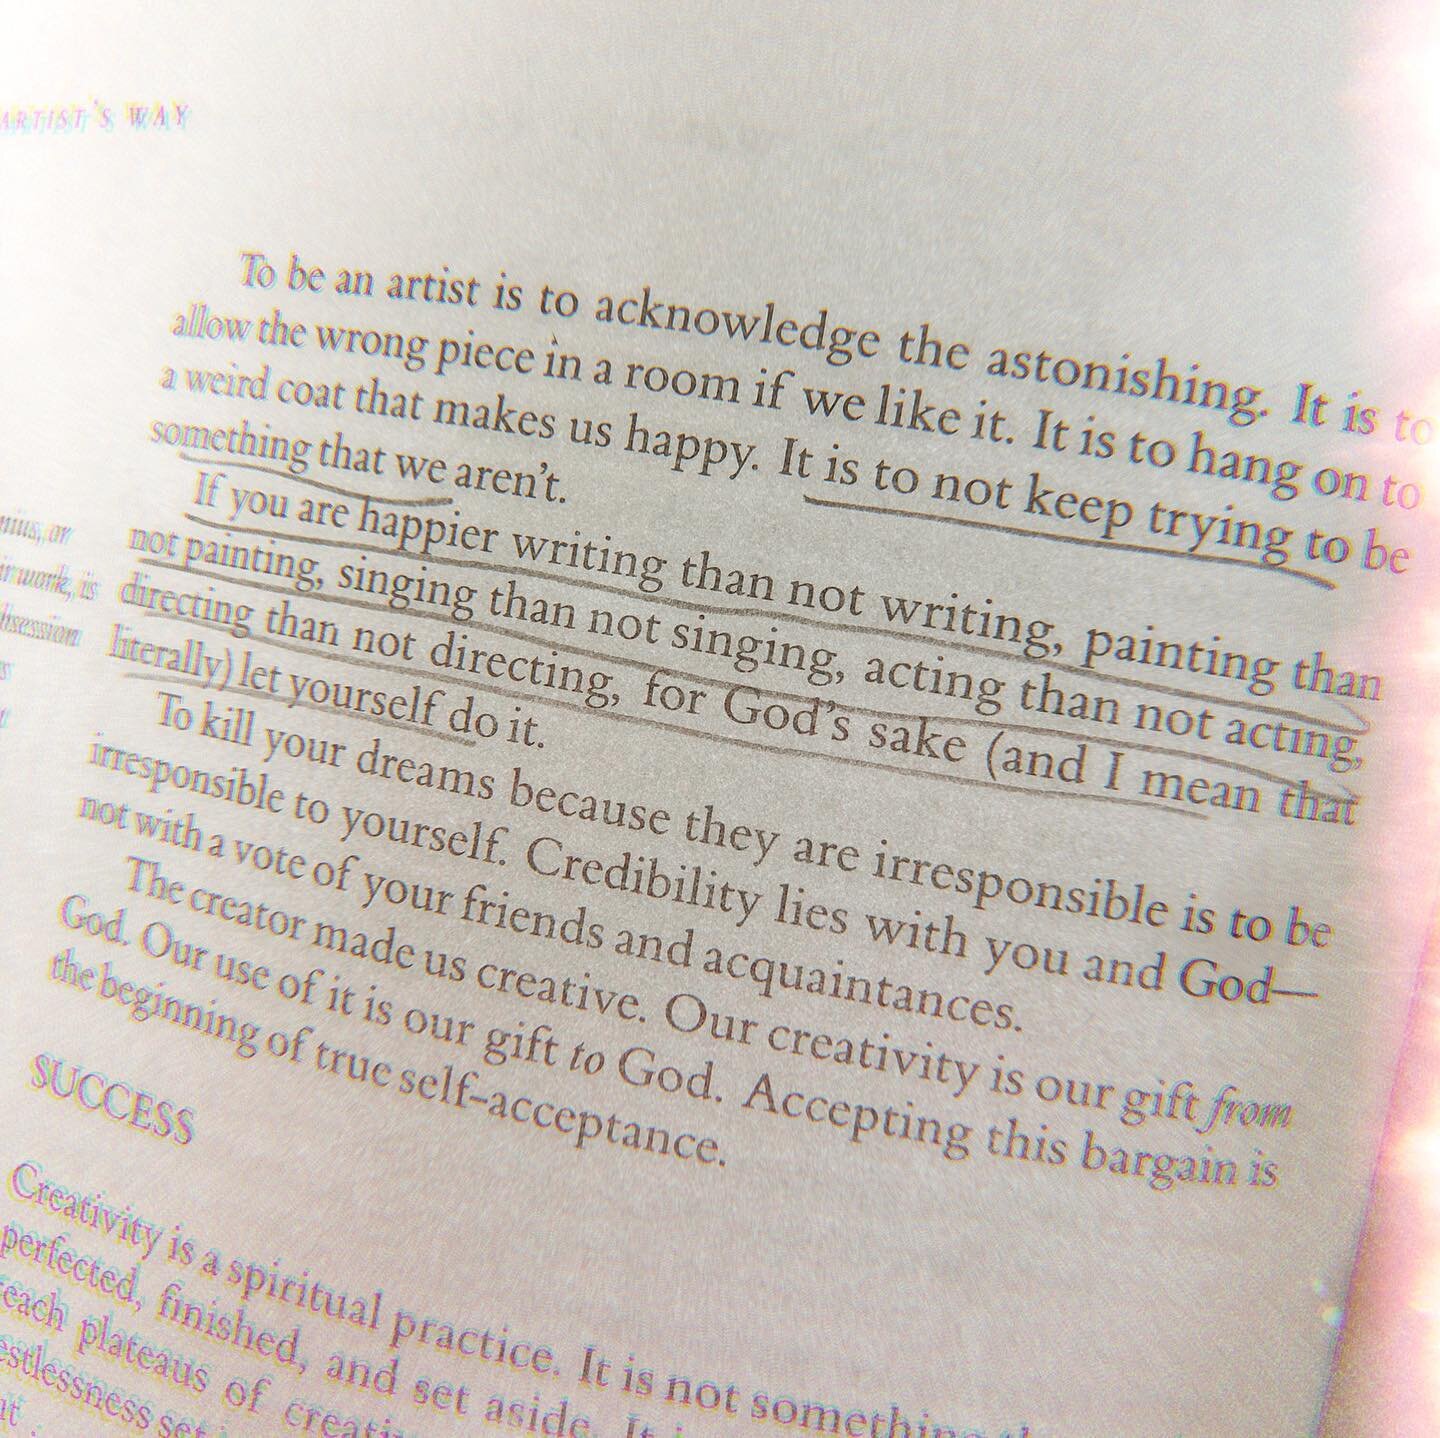 ✨ TO BE AN ARTIST IS TO ACKNOWLEDGE THE ASTONISHING 😩

from The Artist&rsquo;s Way, one of @lizzdawsonn&rsquo;s favs that we talk about all the time. 

Have you read it? 💫

#theartistsway #ourheartscontent #createdtocreate #creator #artistlife #cre